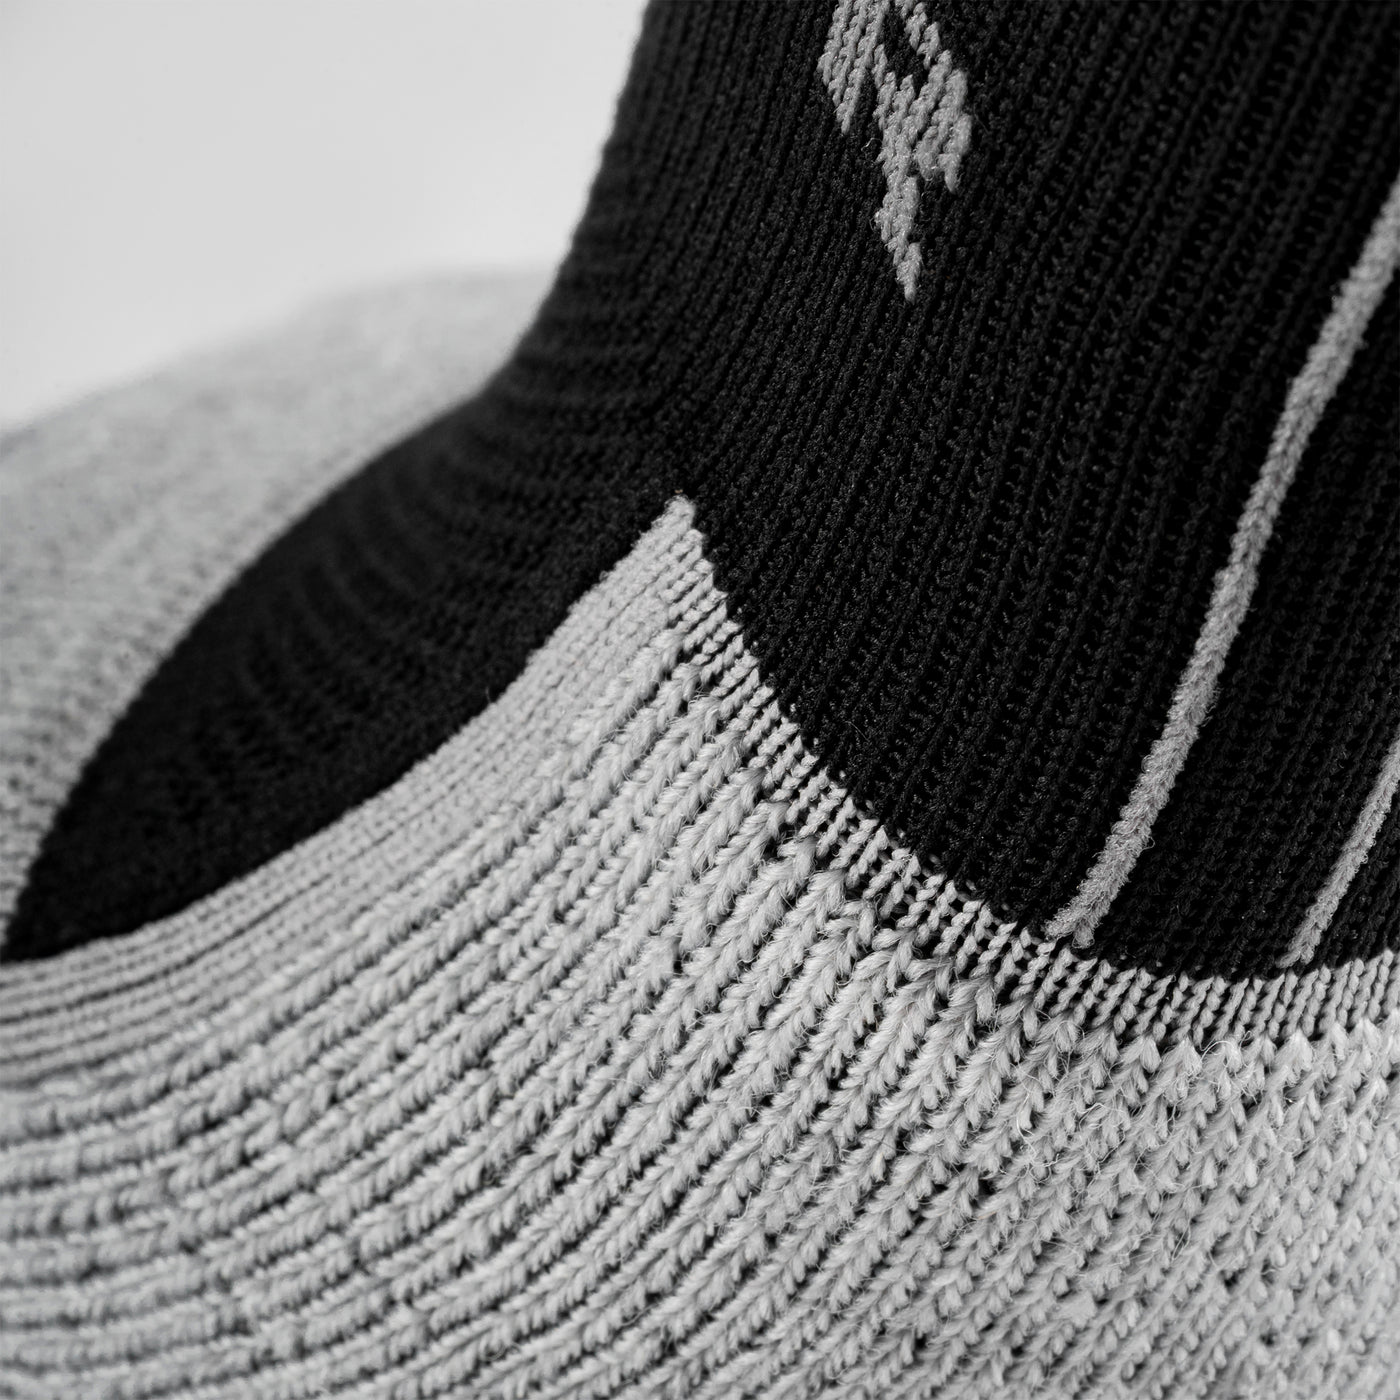 Mudgear Ruck Sock  - MADE TOUGHER - Made in the USA 